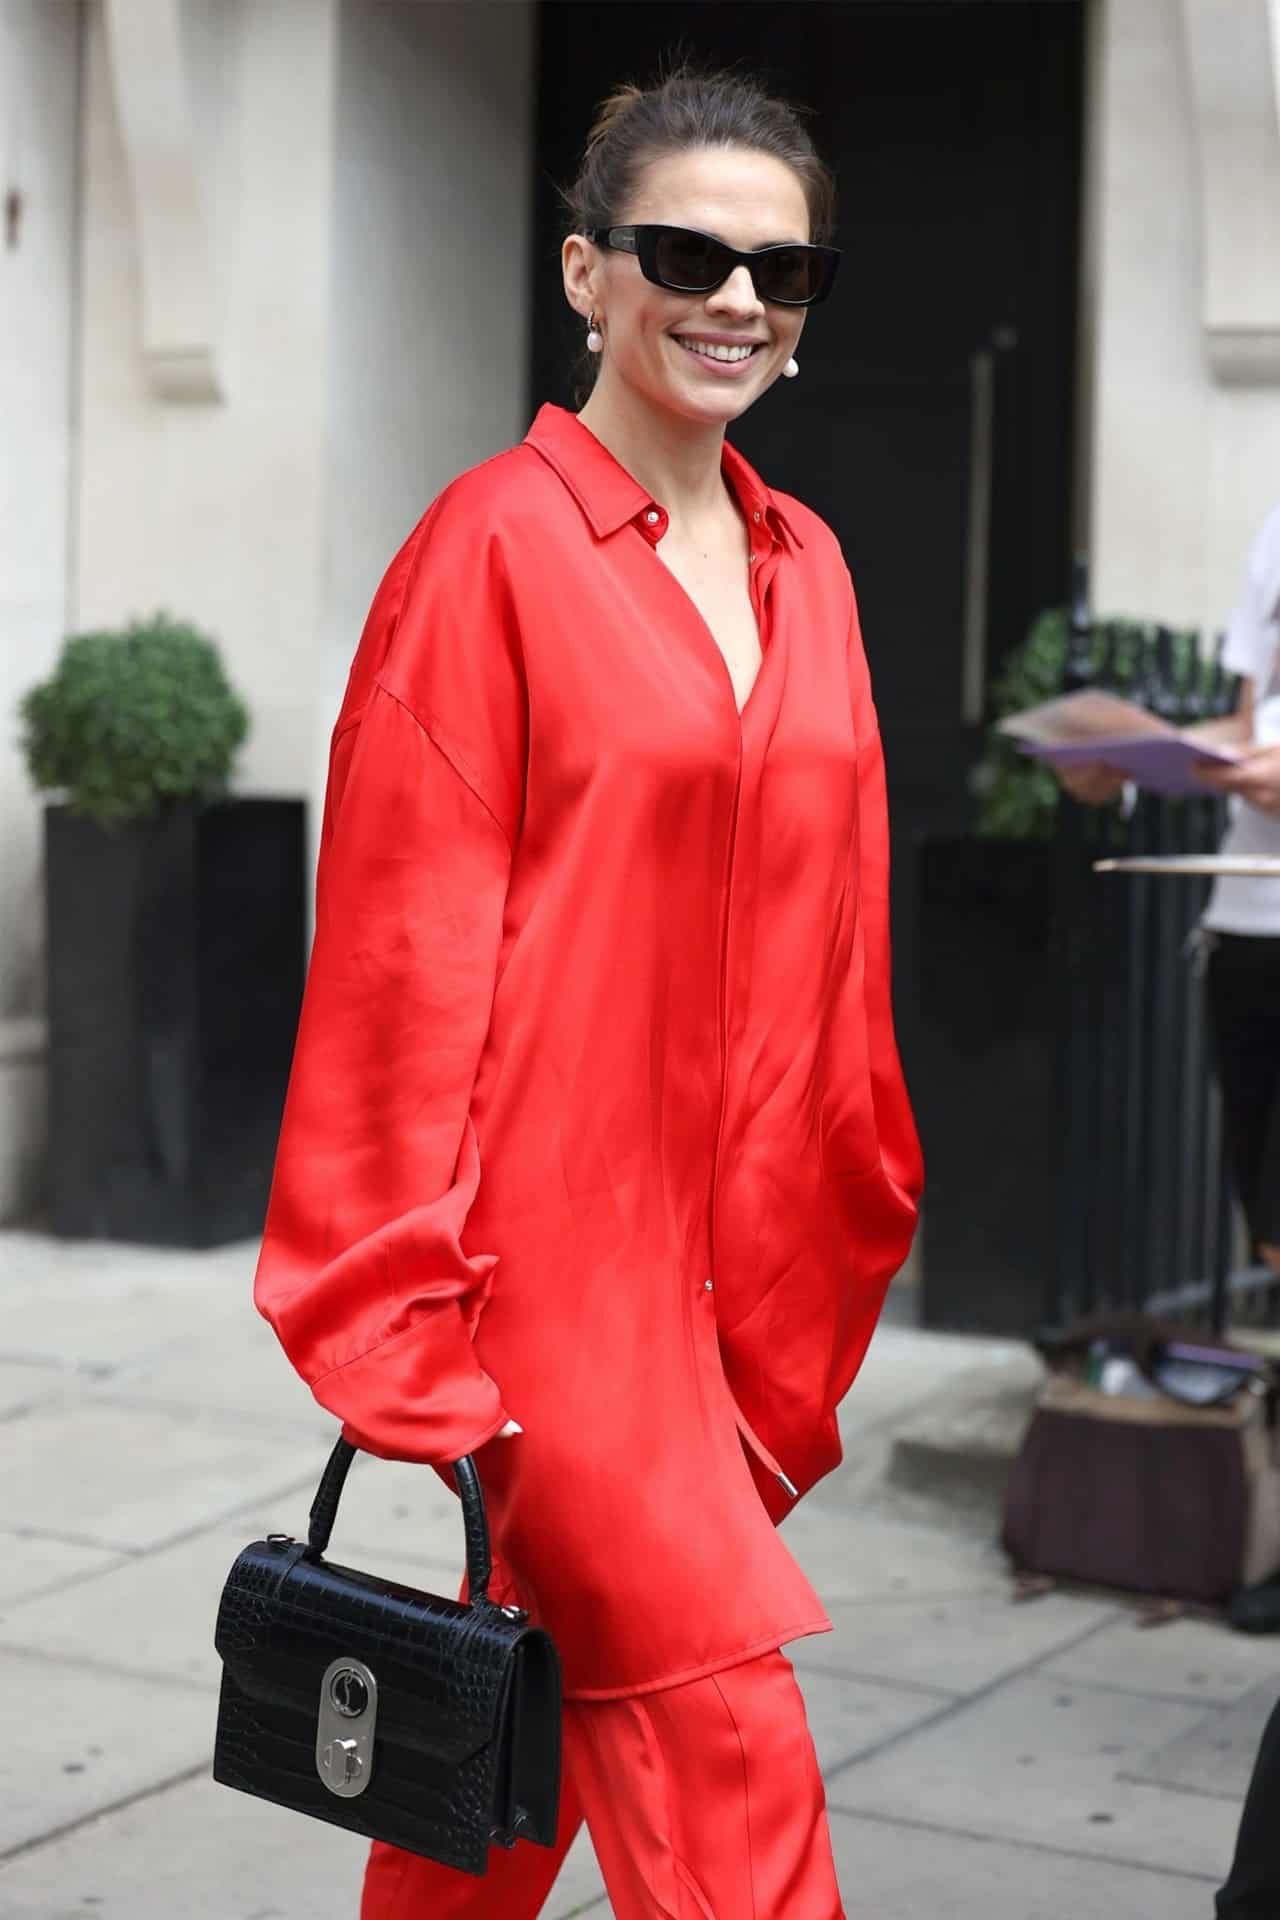 Hayley Atwell Radiates Confidence and Style in Red Silk Suit